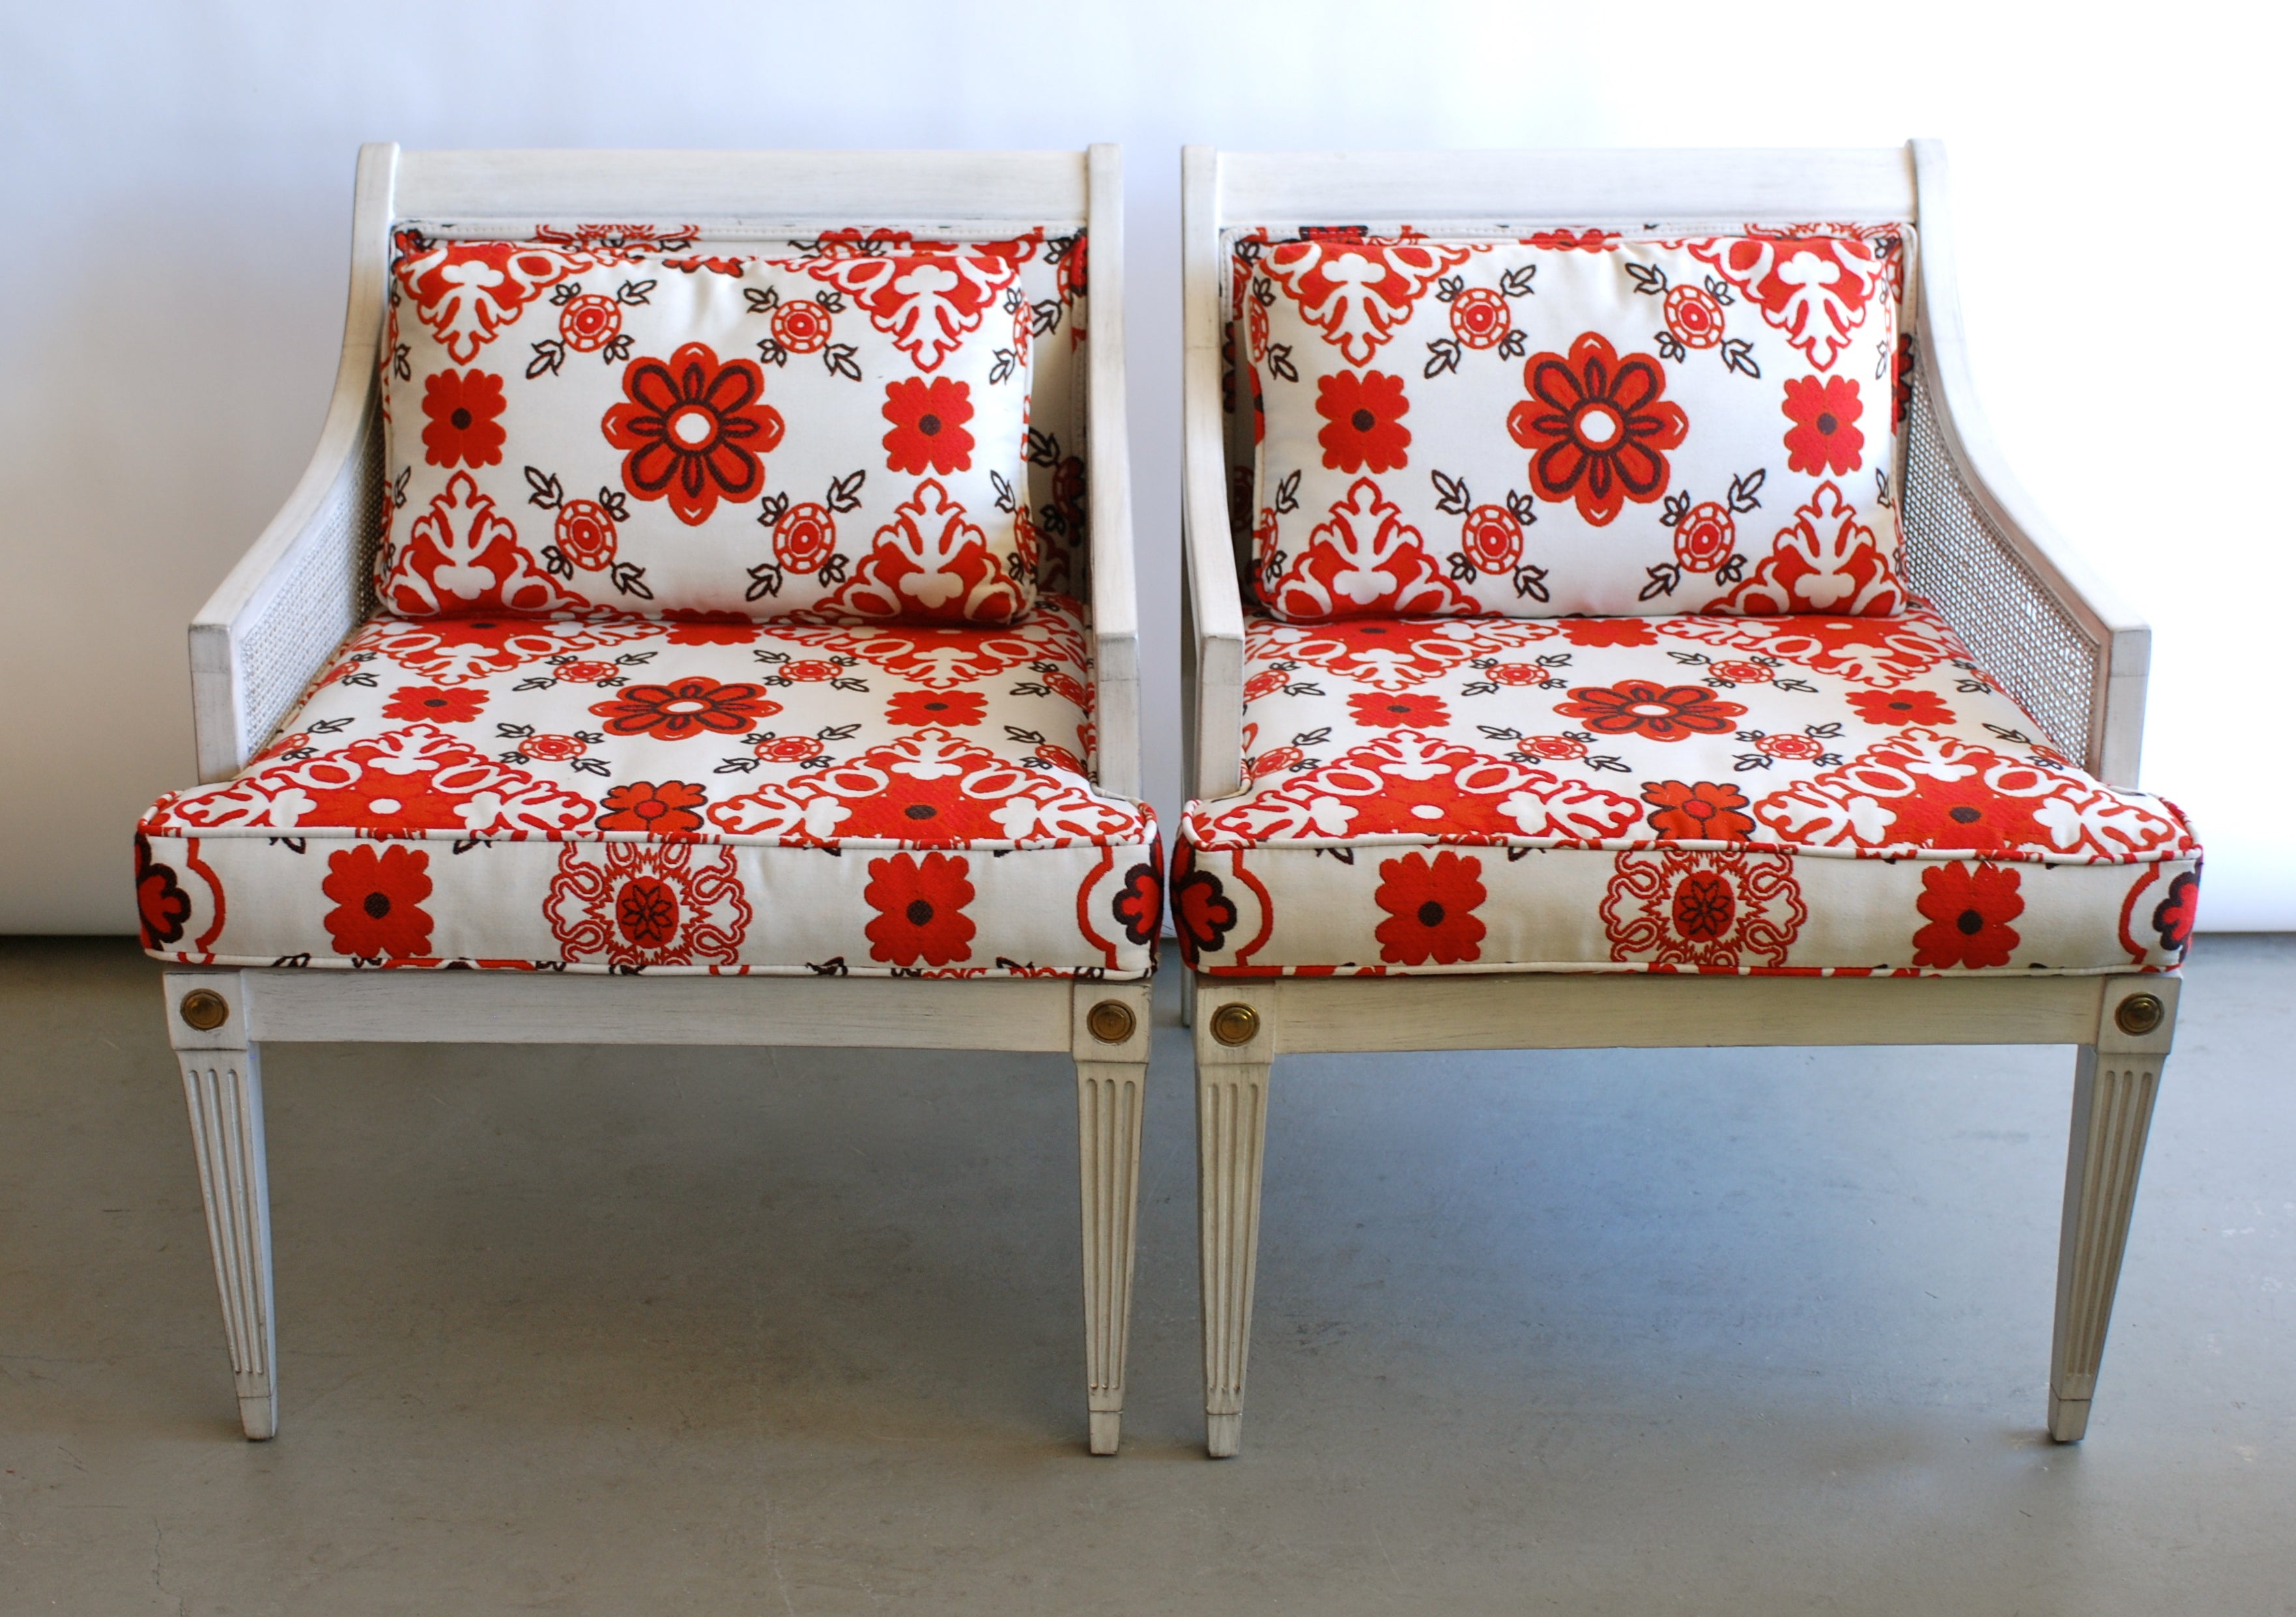 Pair of Painted Cane Chairs